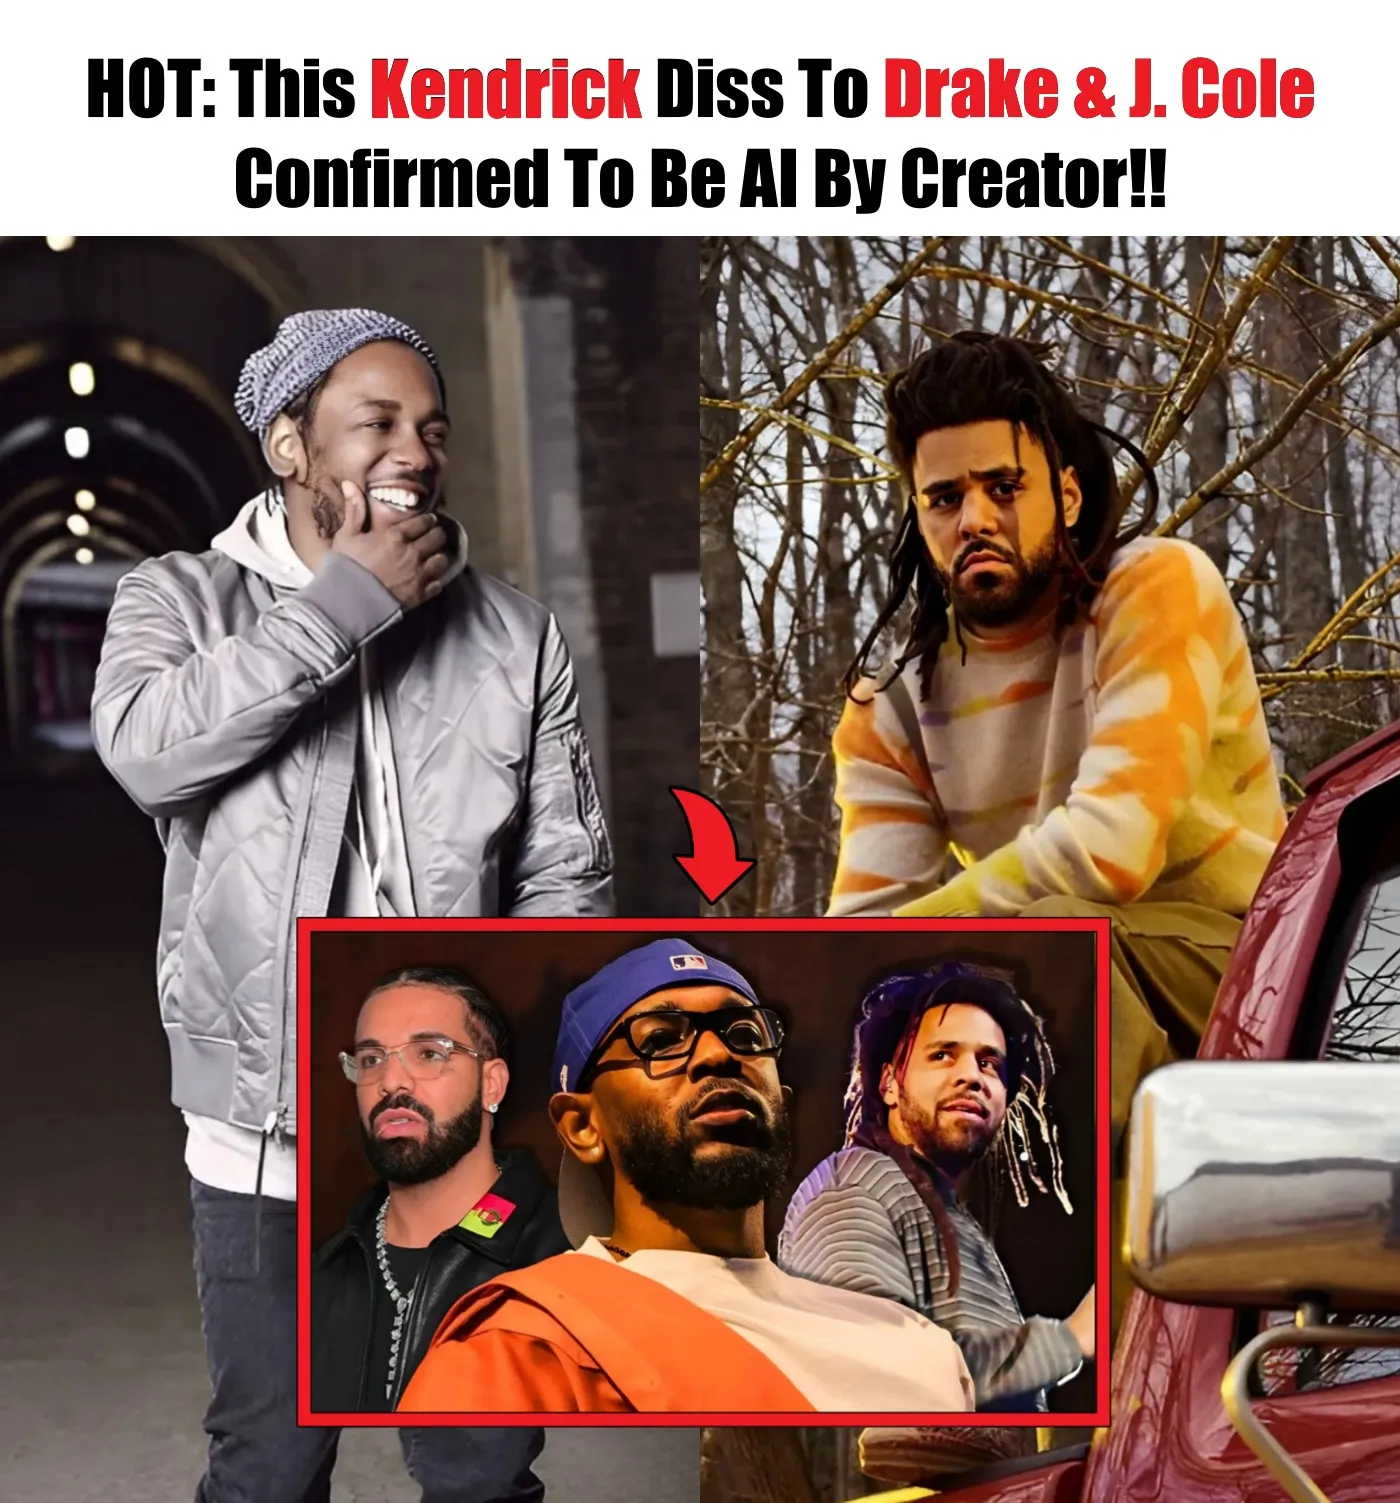 Cover Image for HOT: This Kendrick Diss To Drake & J. Cole Confirmed To Be AI By Creator